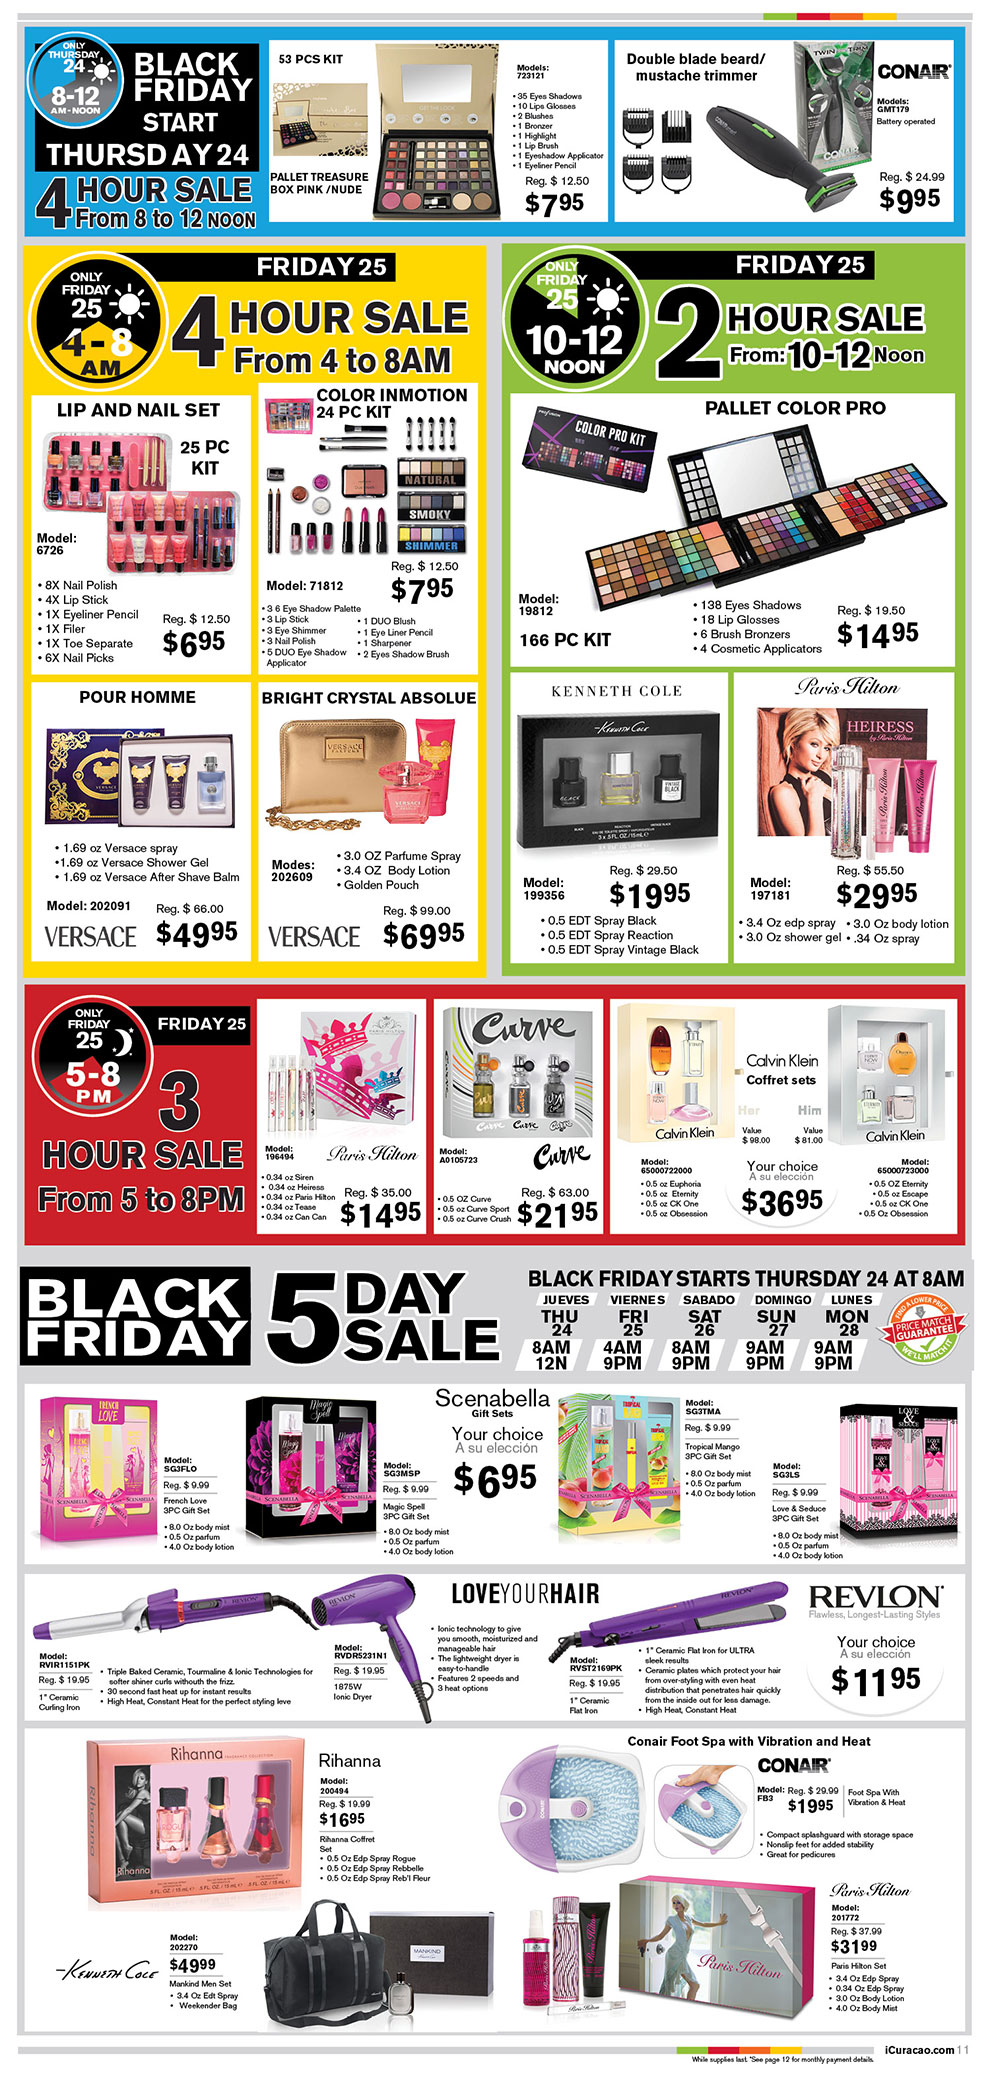 Curacao 2016 Black Friday Ad Page 11